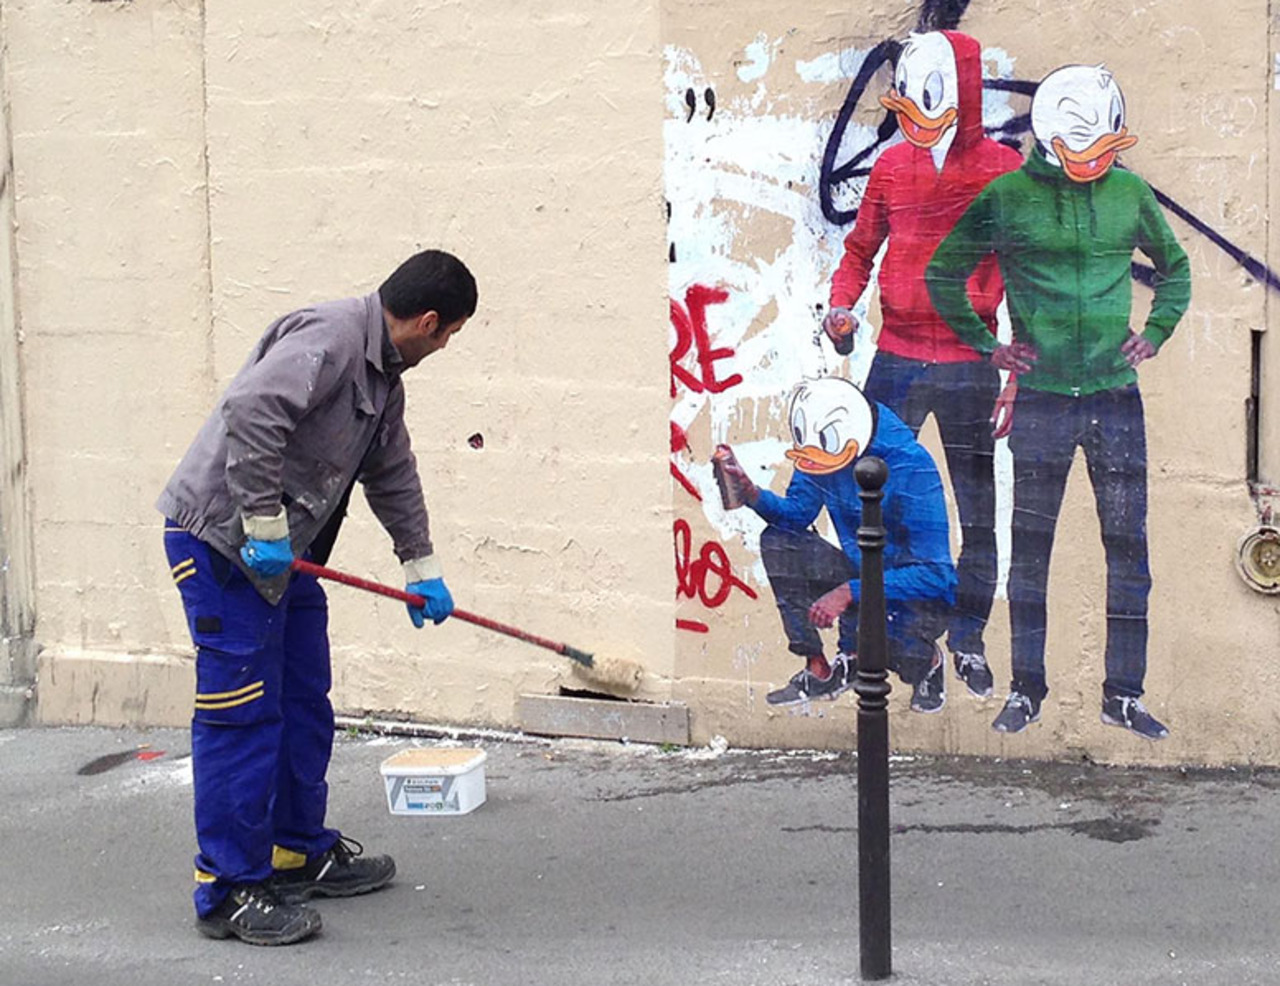 ColinStephens8: RT _inkster_: This is too #funny! #Graffiti removal guy gets turned into #streetart in #Paris … http://t.co/dXZxoqziwI